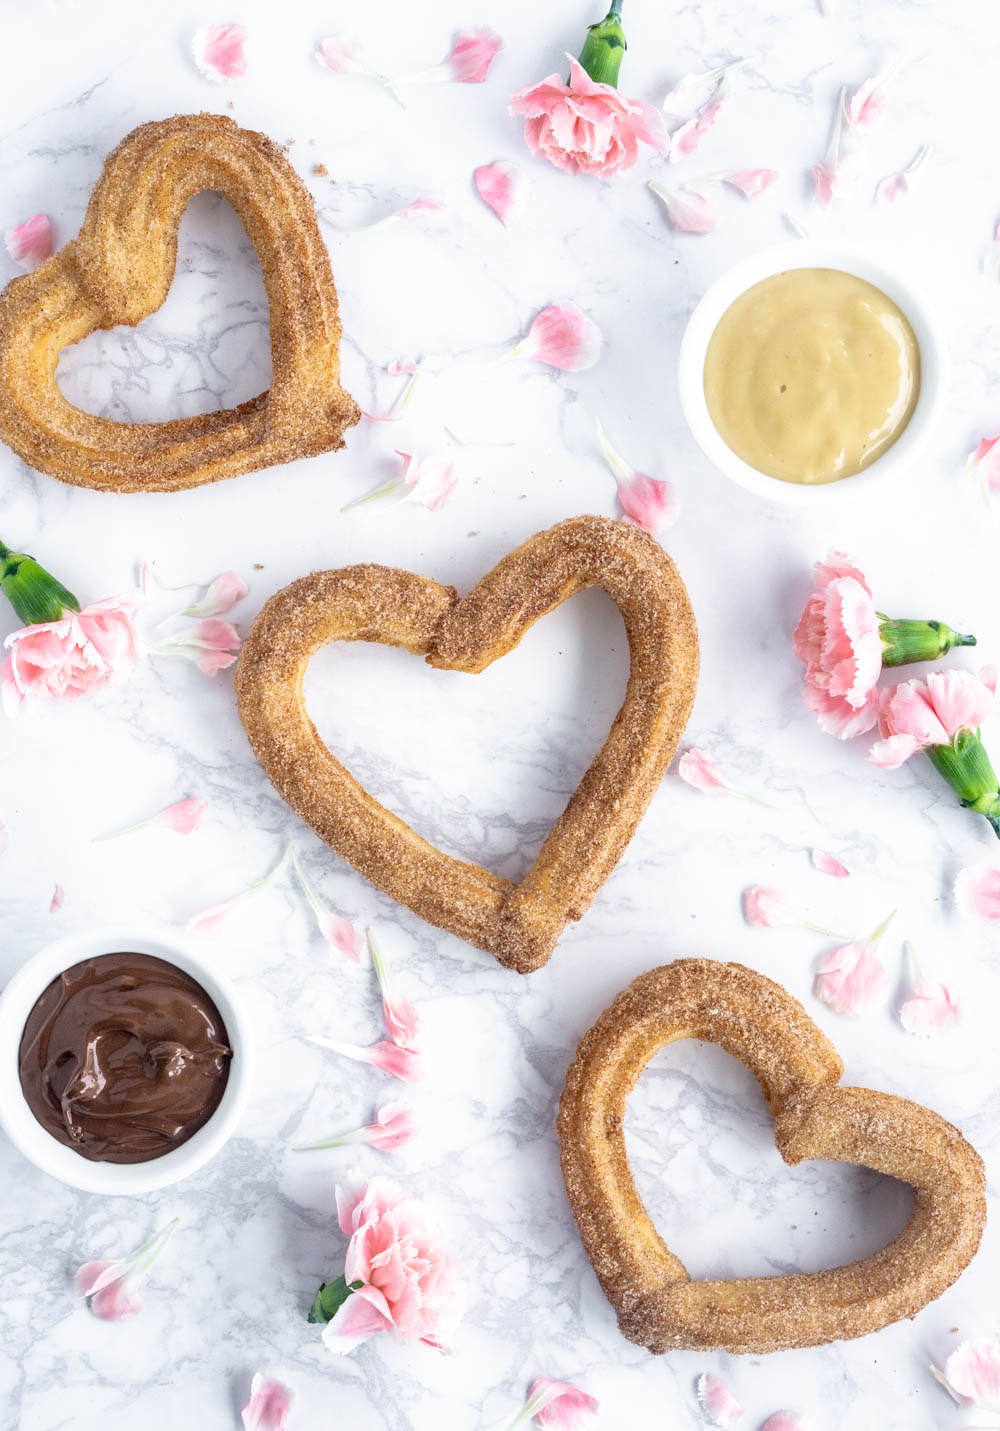 Heart Churros with Nutella and Mascarpone Dipping Sauces